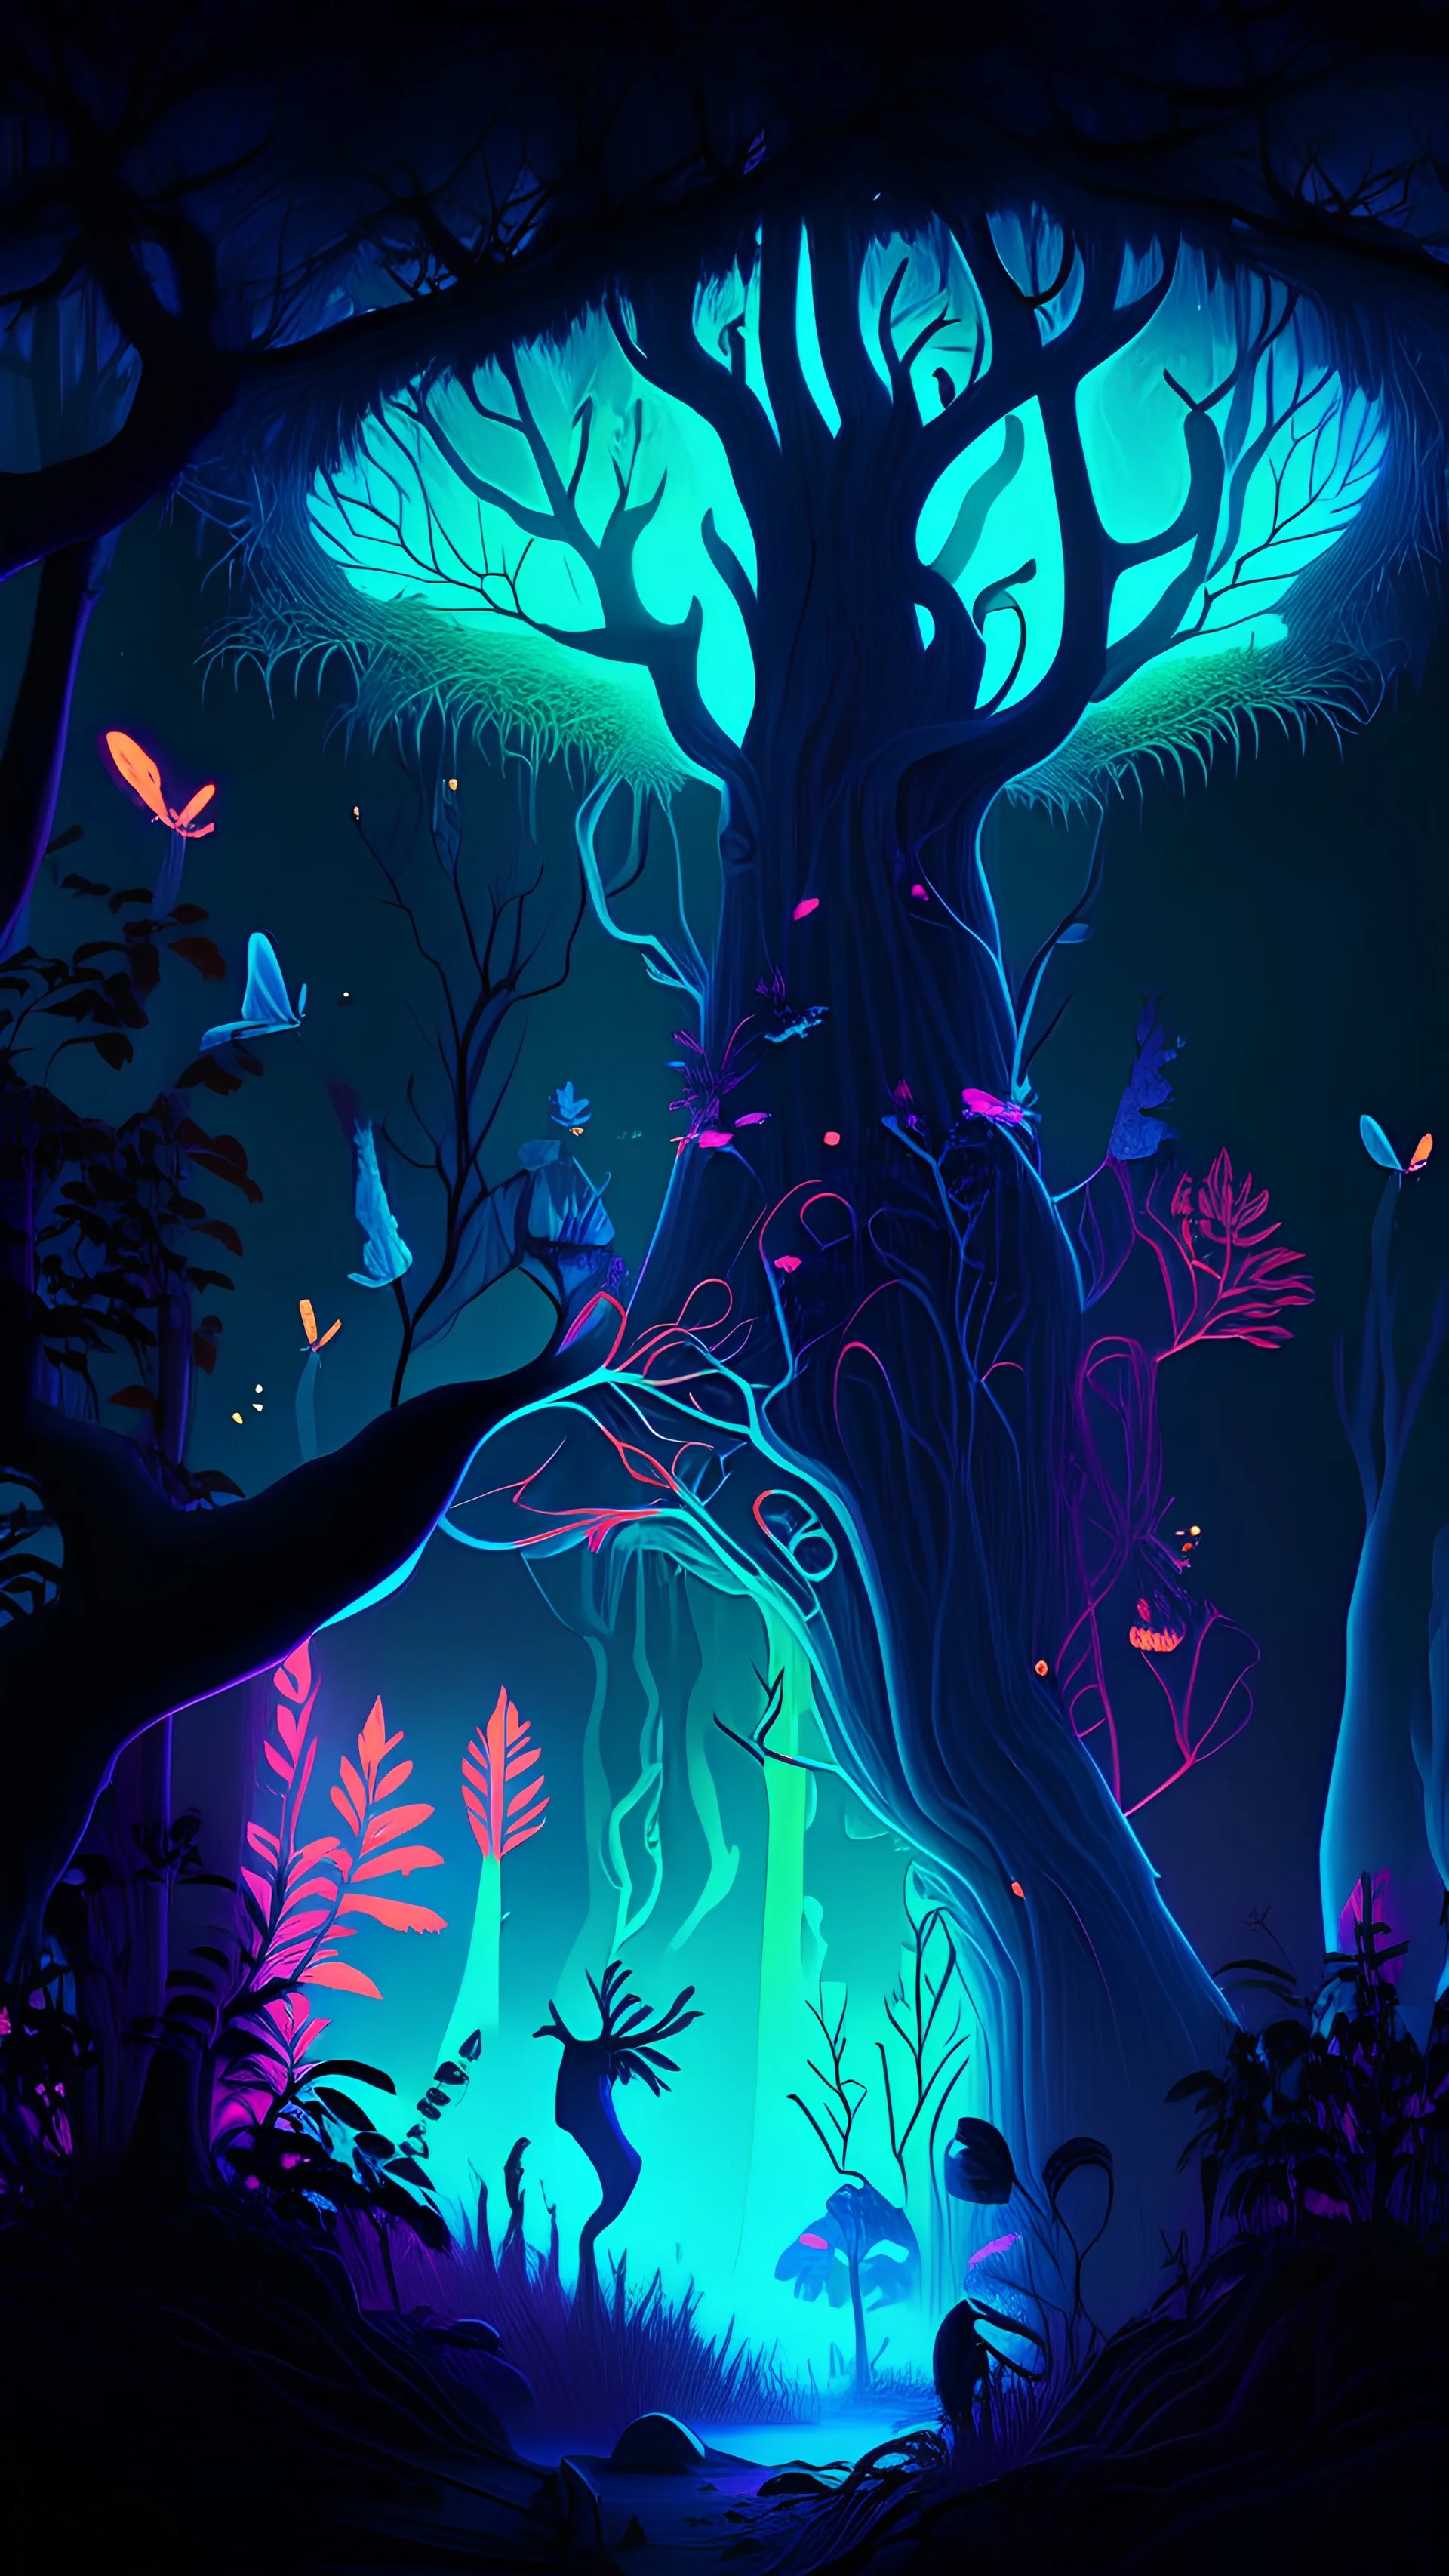 Create an otherworldly forest with bioluminescent flora and fauna. The trees should glow with vibrant colors, and mythical creatures should inhabit the scene.